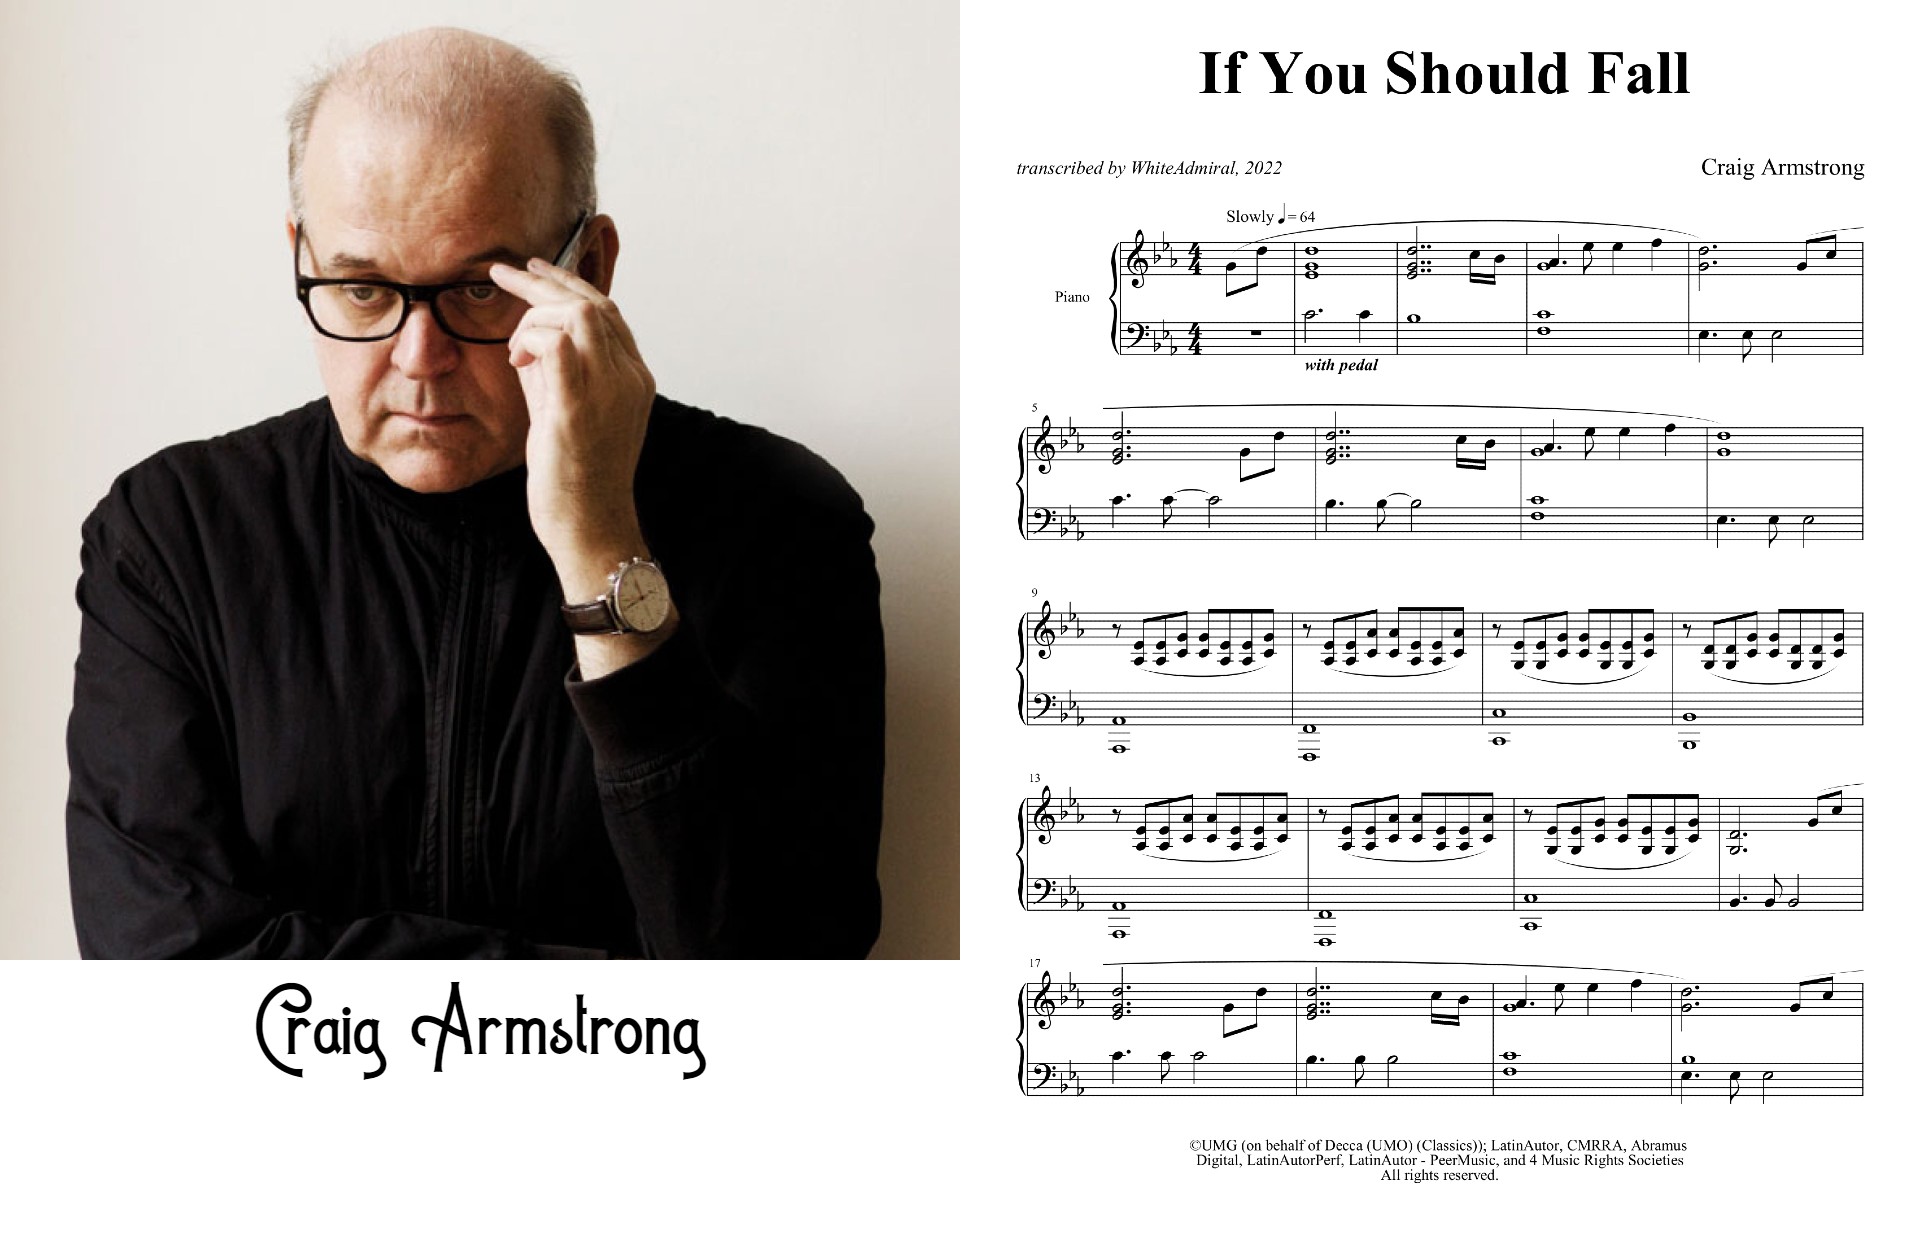 Craig Armstrong - If You Should Fall.jpg